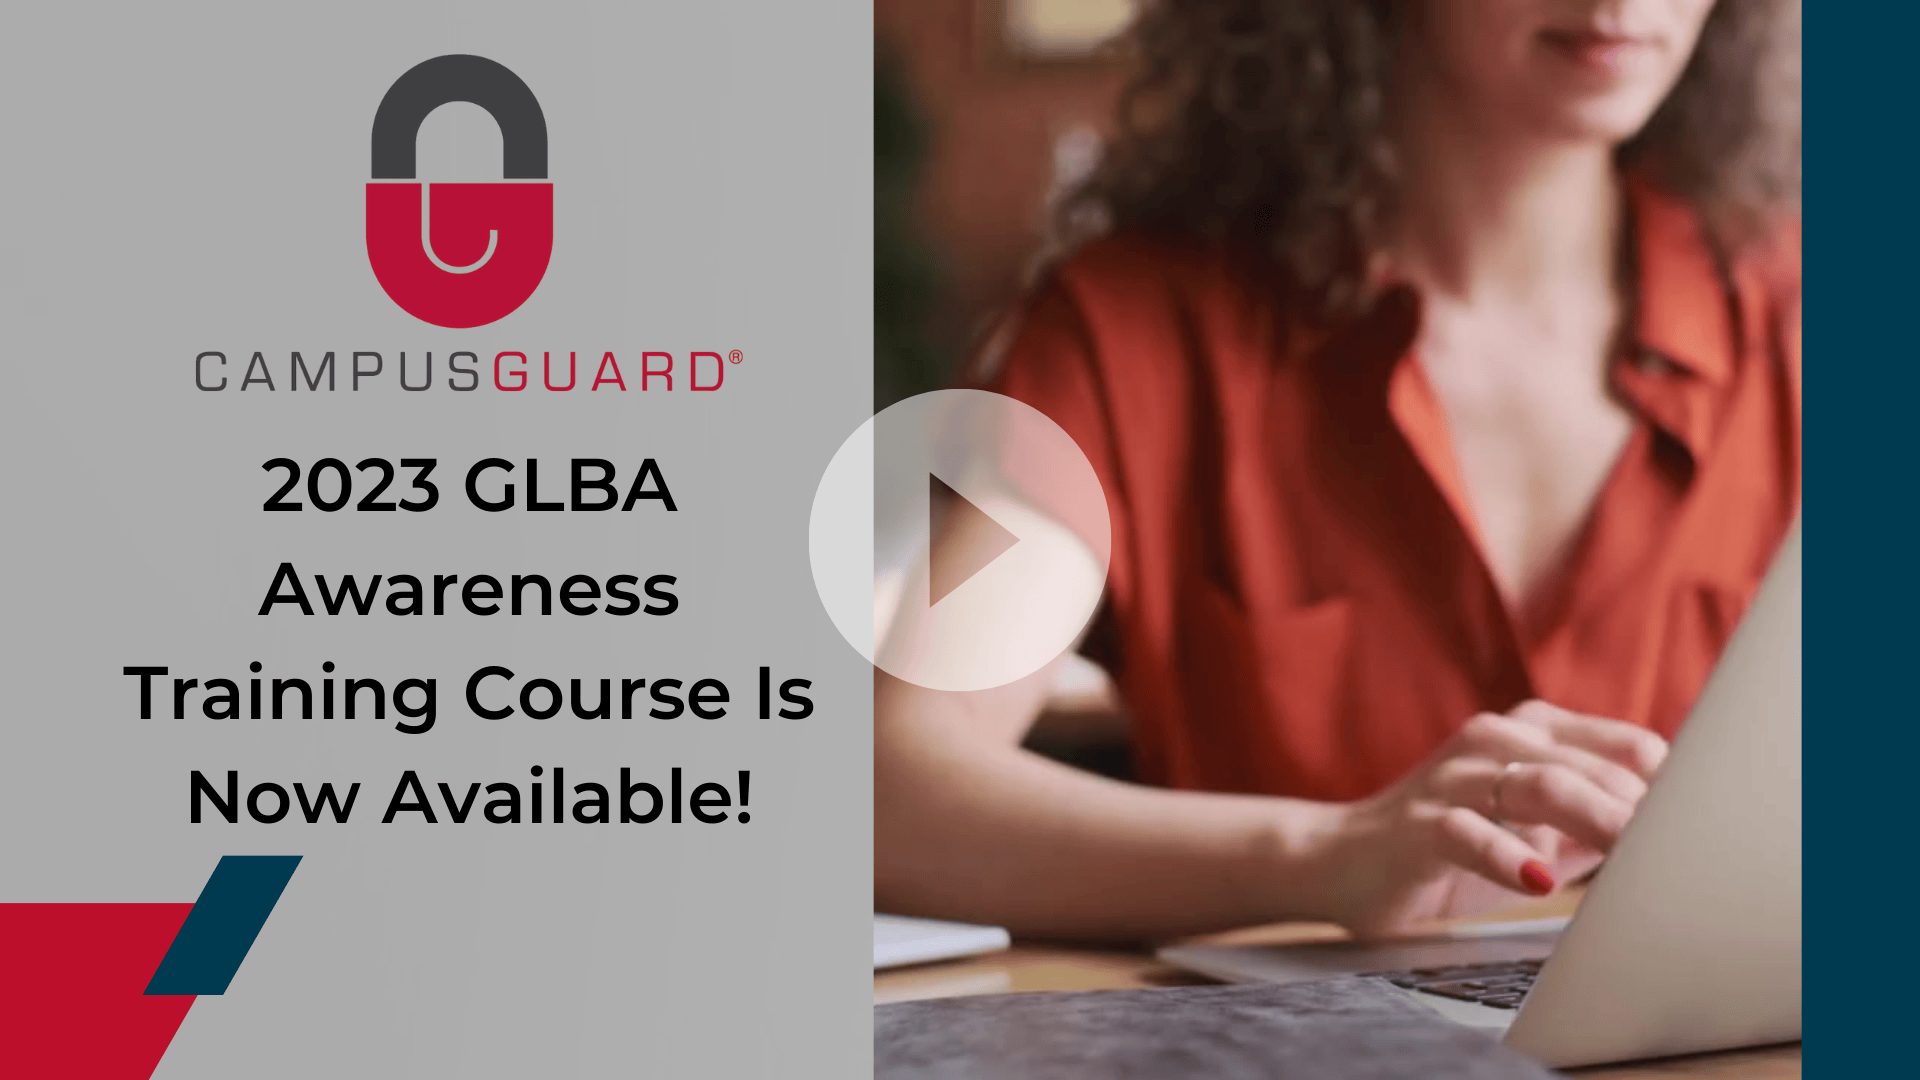 2023 GLBA Awareness Training Course Is Now Available!